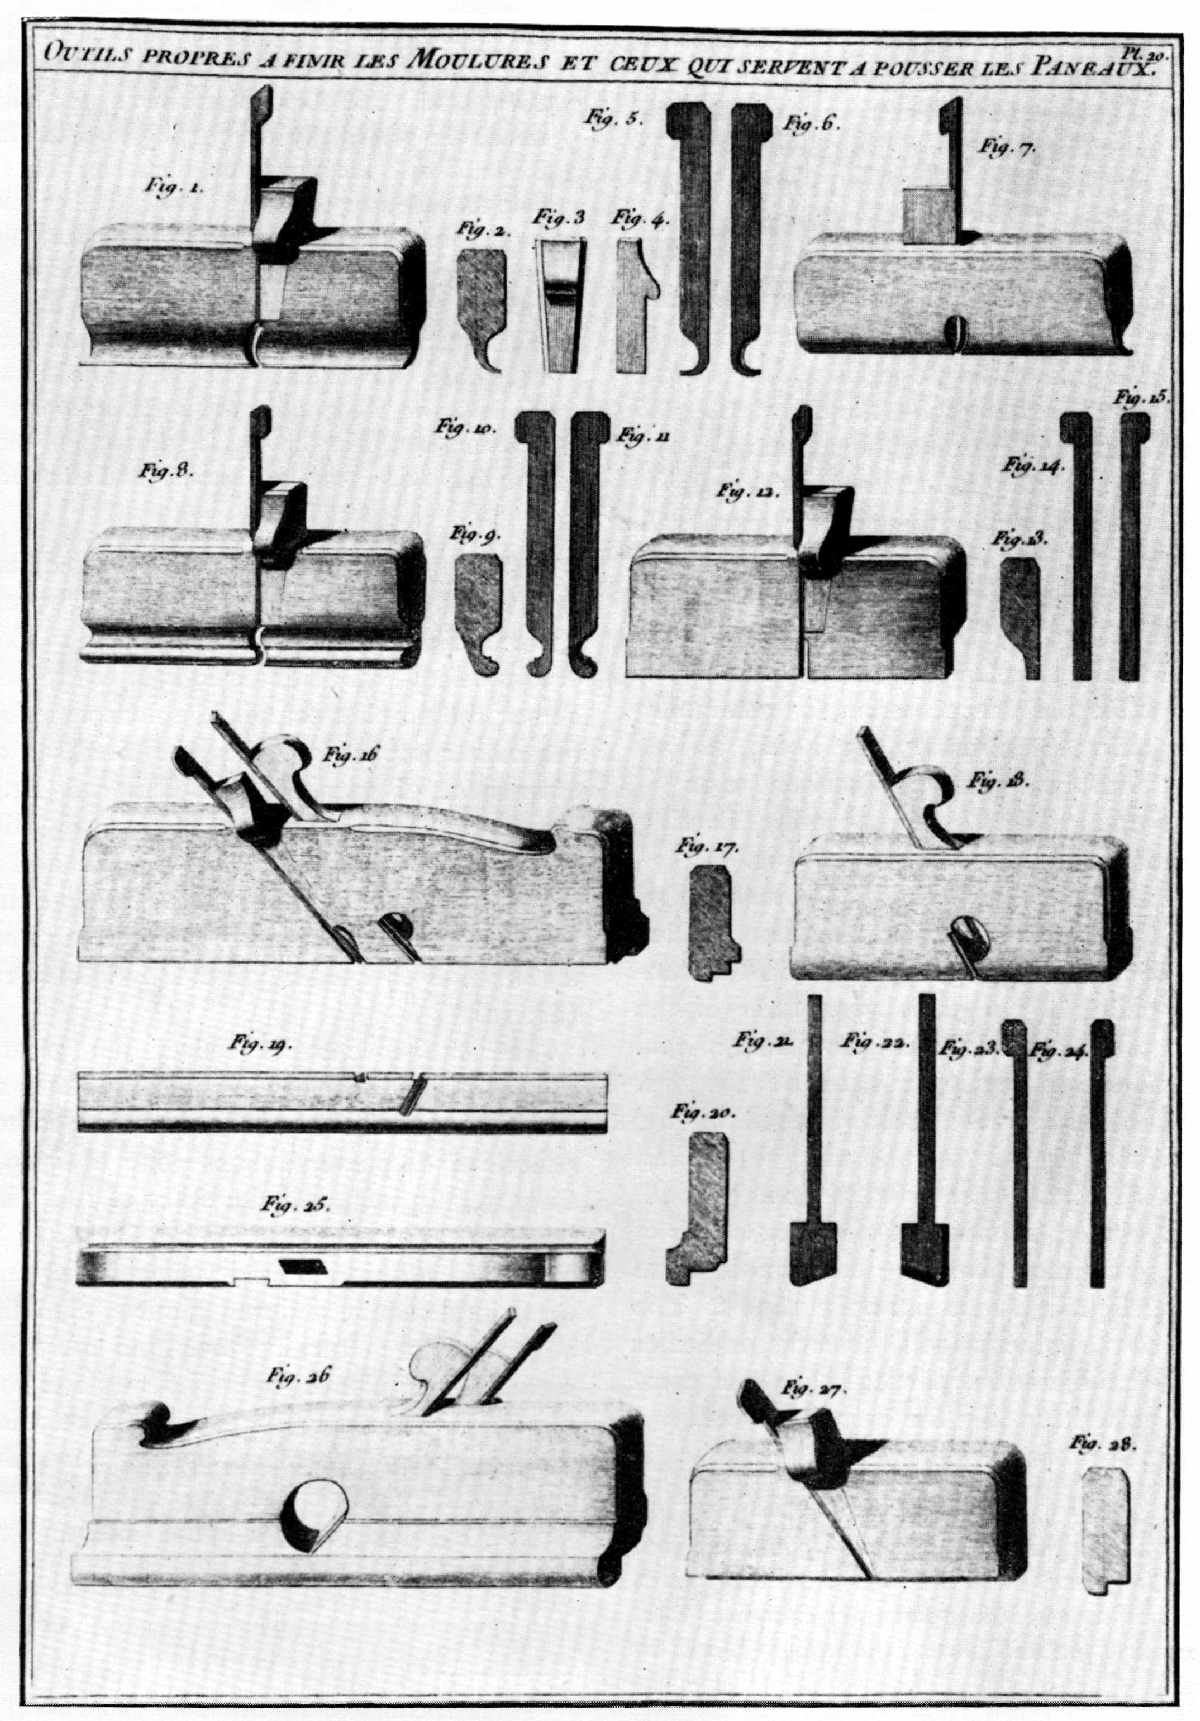 Ancient tools & History of Woodworking – Journeyman's Journal